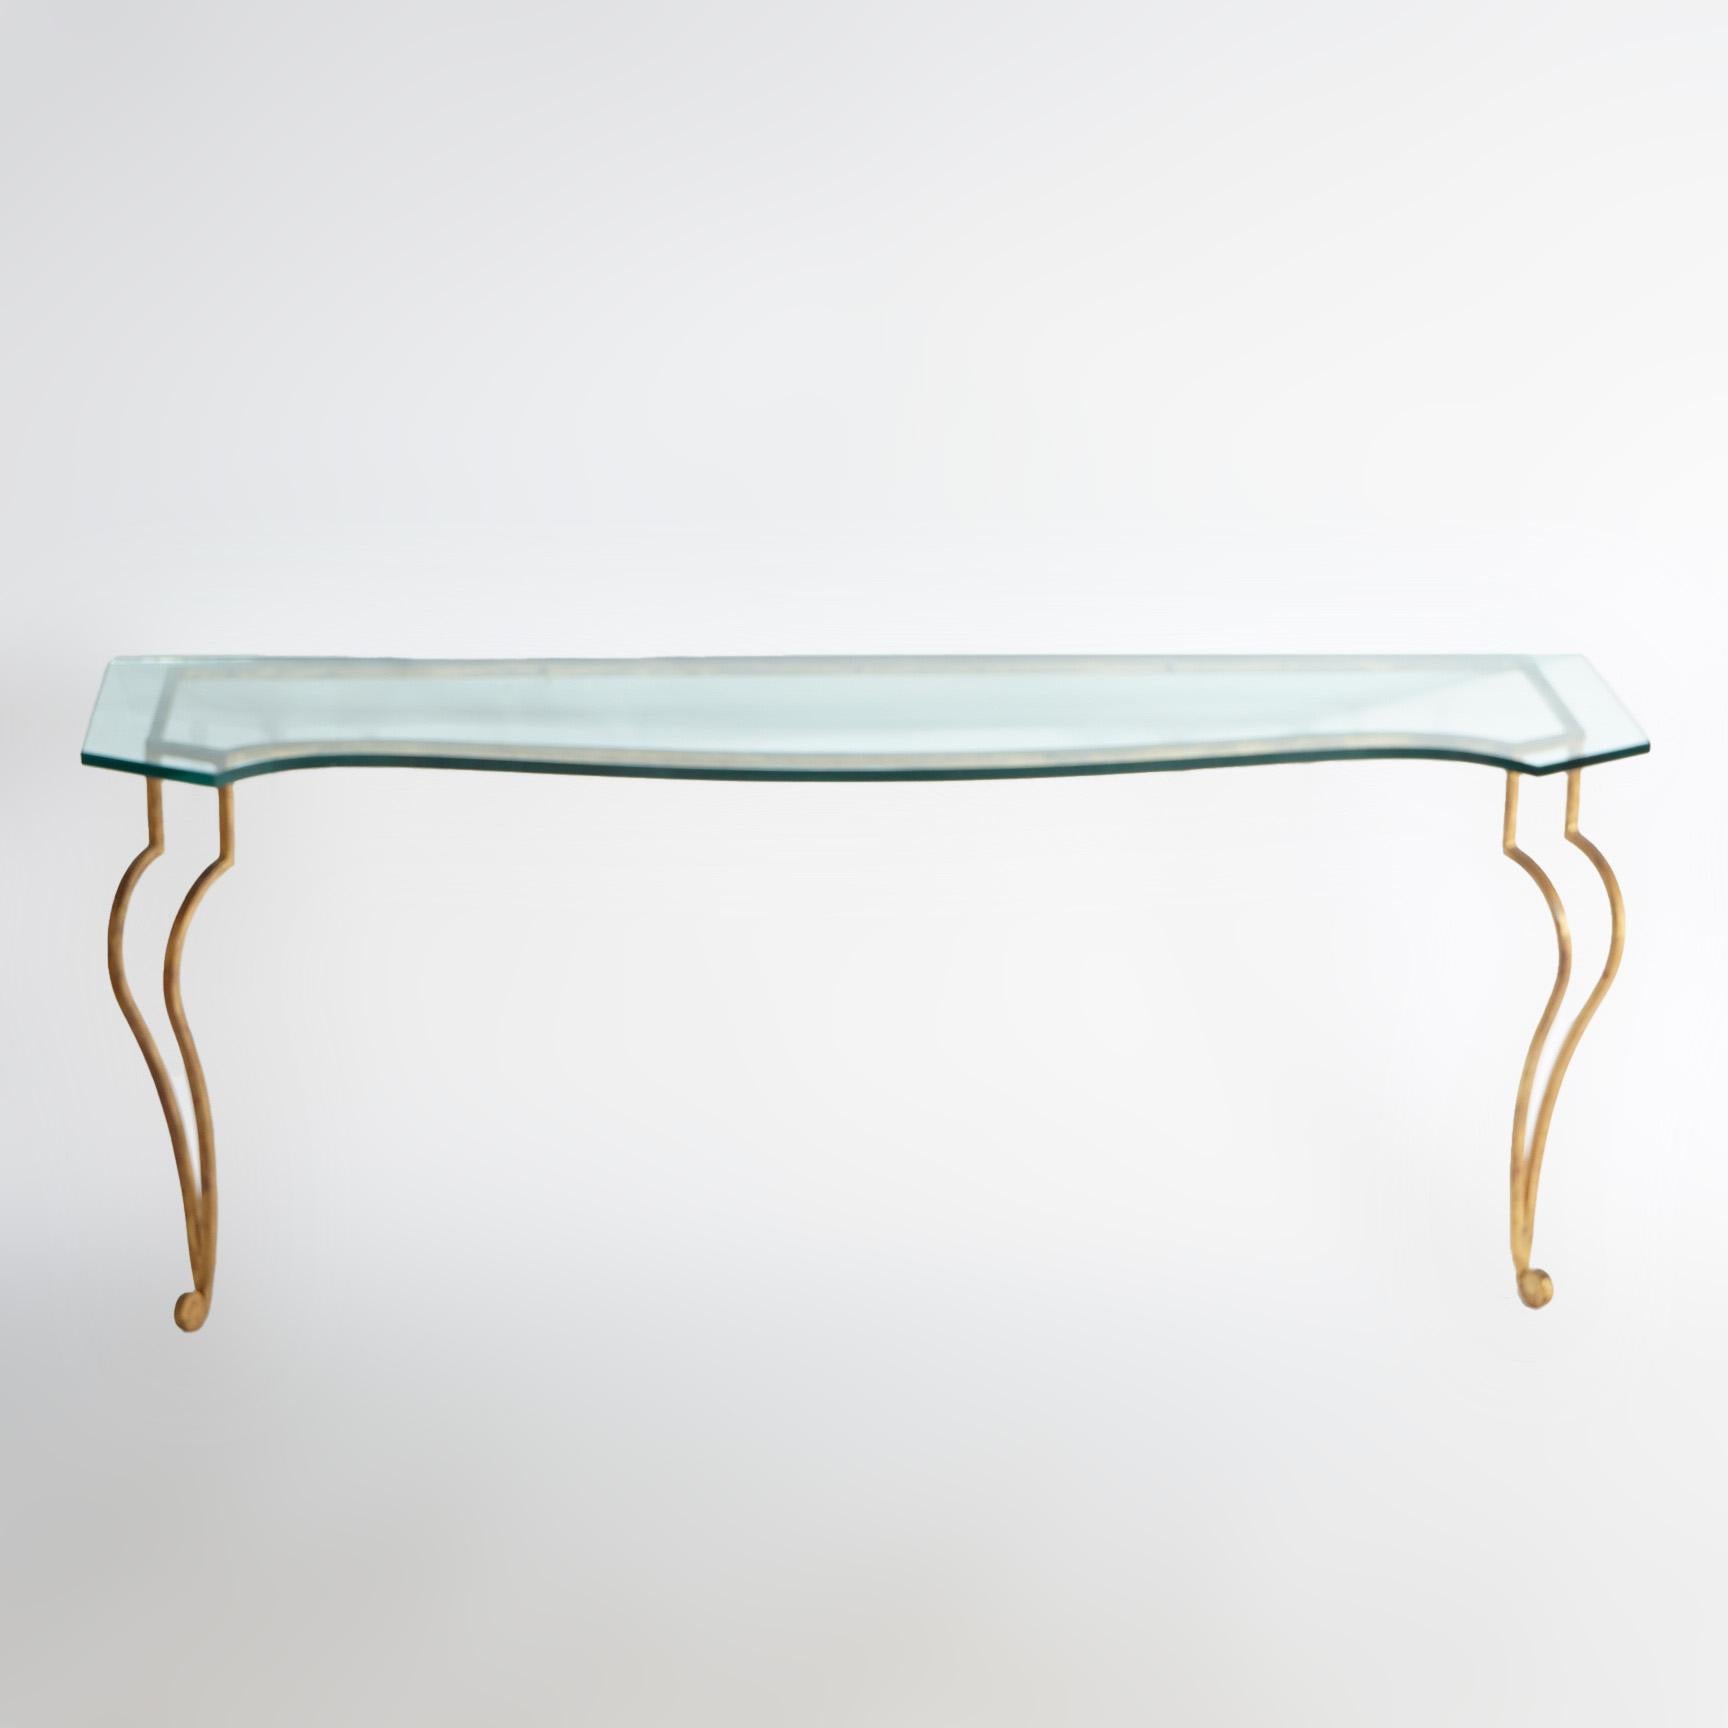 20th Century Italian Gold Gilt Wrought Iron Console Table with Glass Top 20th C For Sale